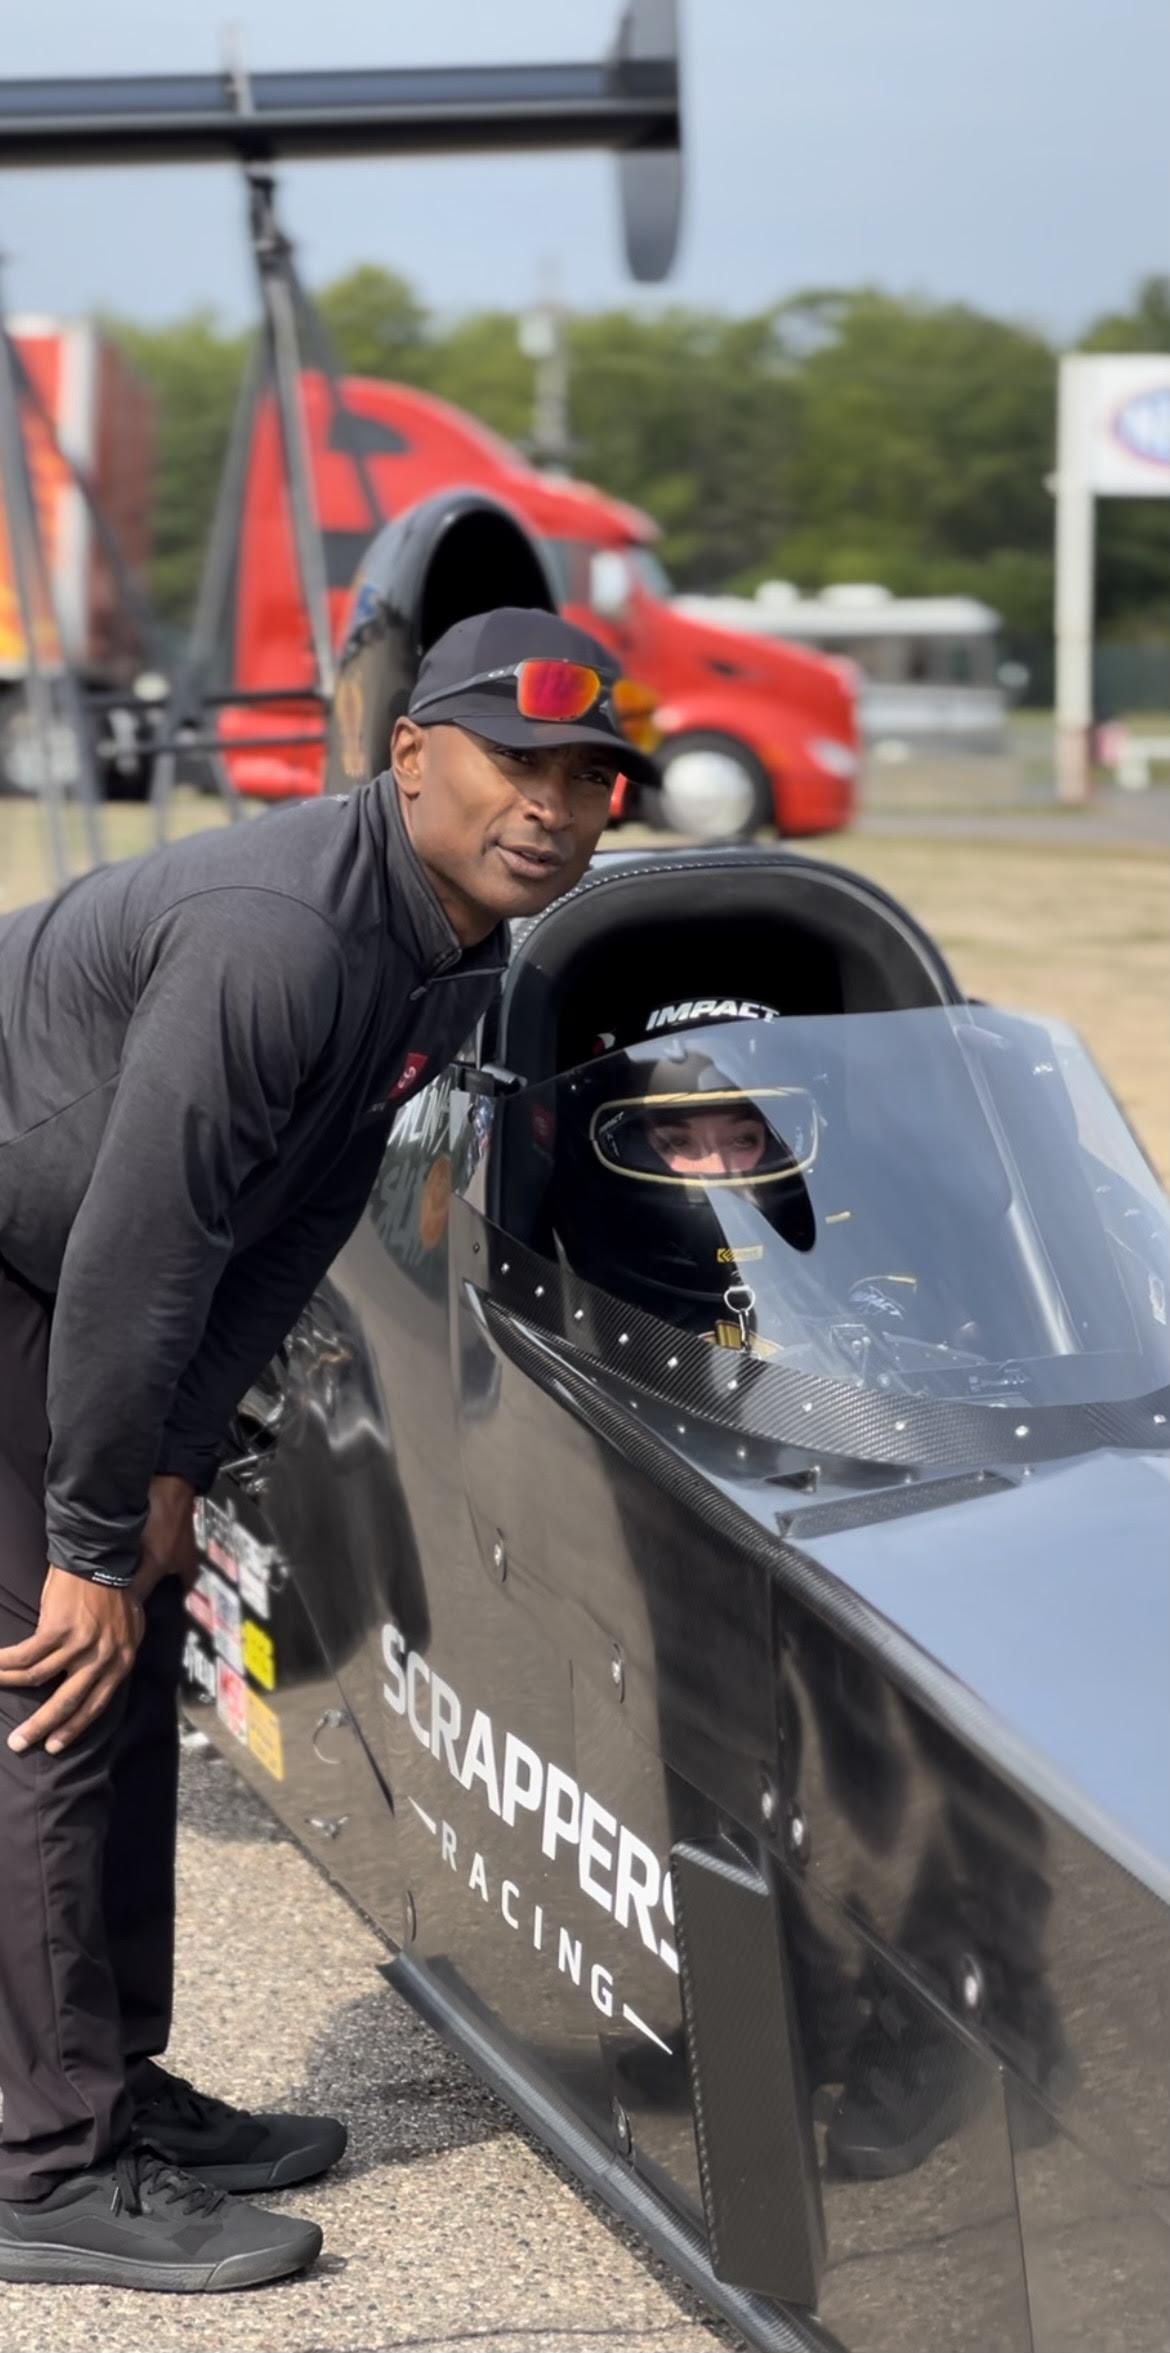 Antron Brown and Angelle Sampey